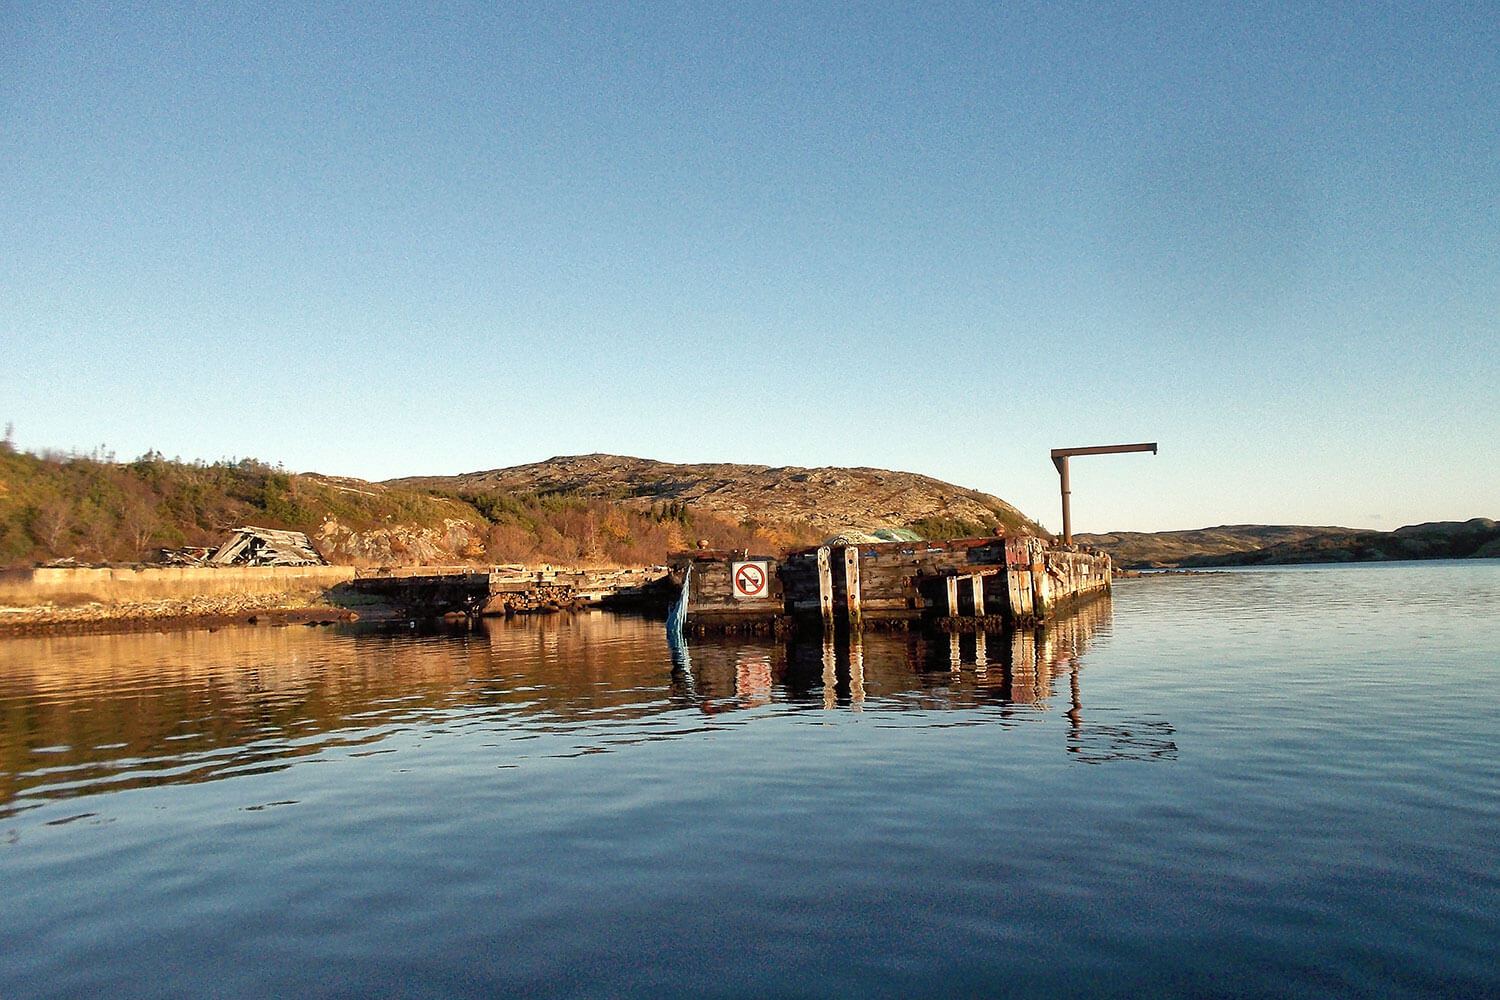 Environmental assessment of sediment and other mediums around the disused wharf on Esquimaux Island in Baie de Bonne-Espérance on the Gulf of St. Lawrence.